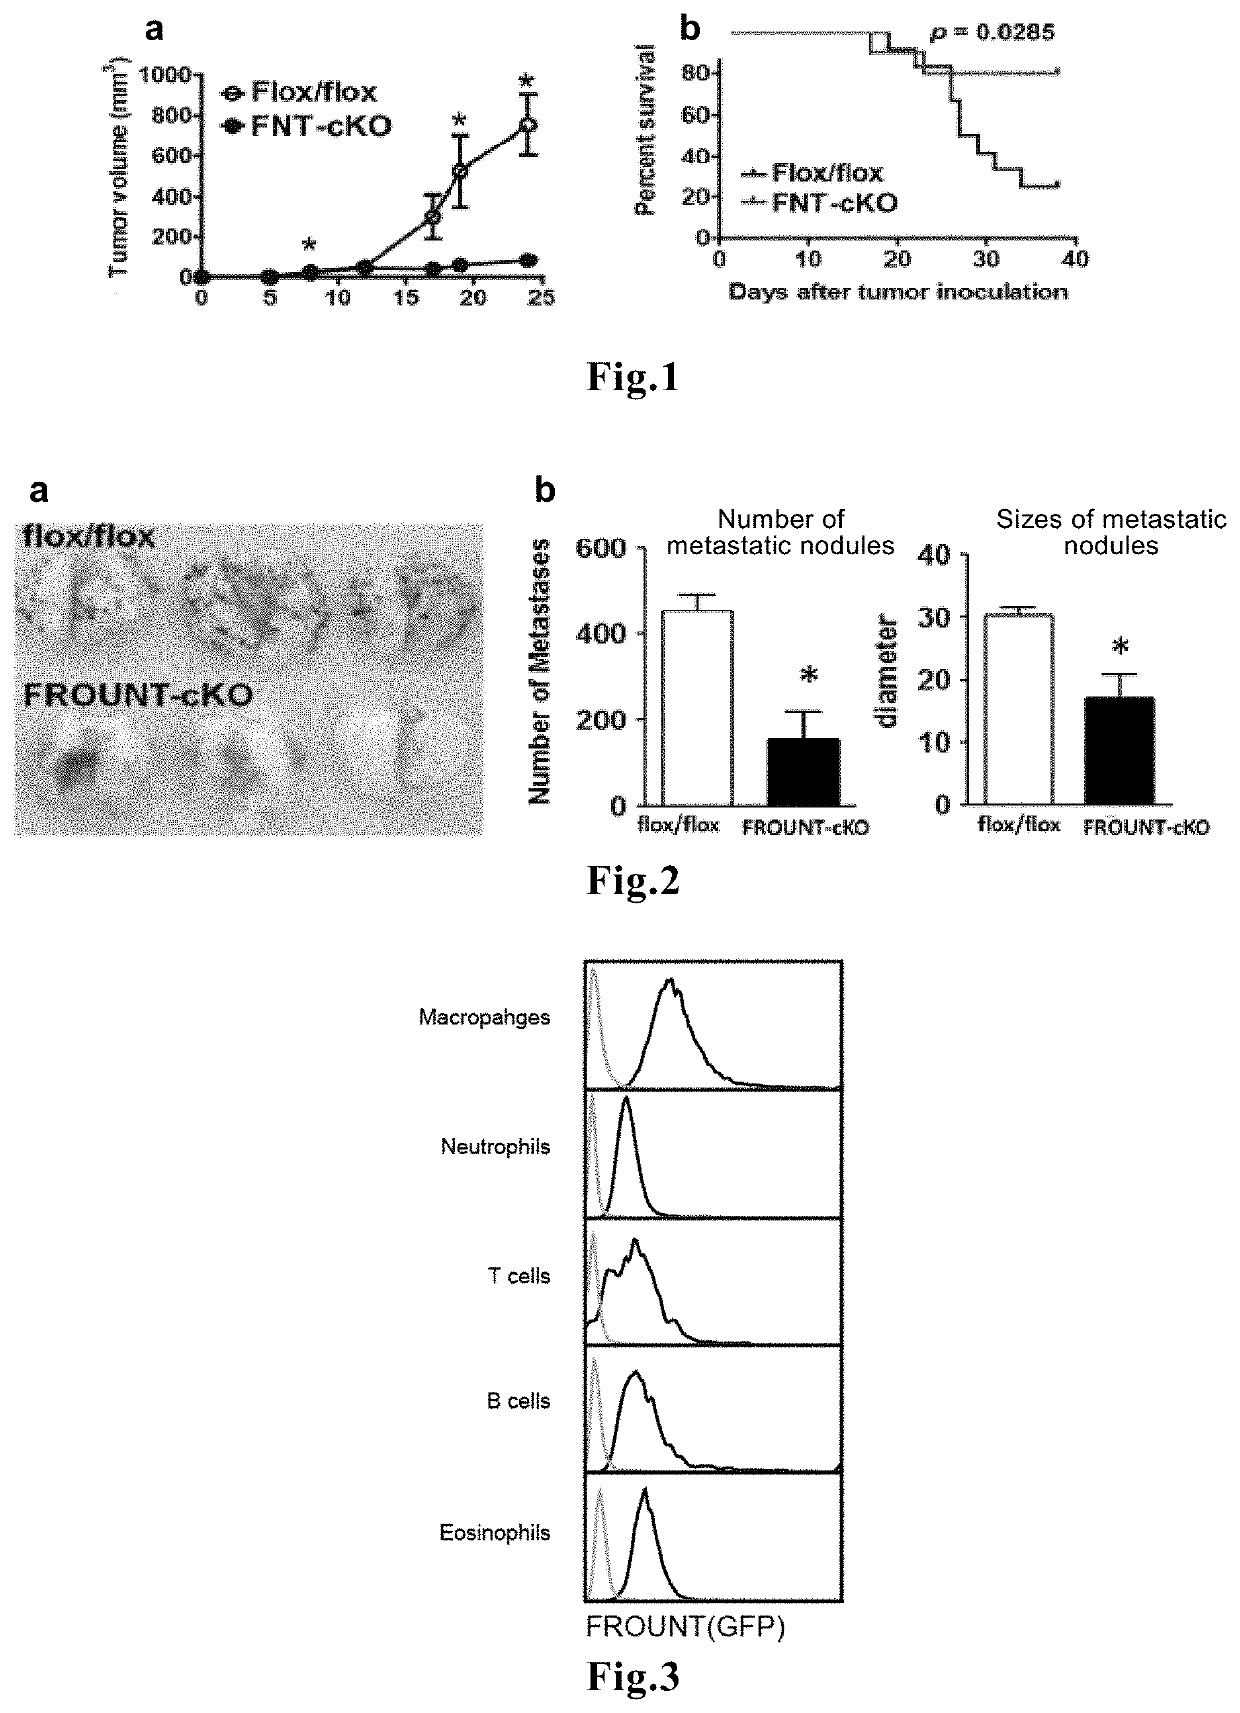 Method for predicting prognosis of patient with cancer or inflammatory disease